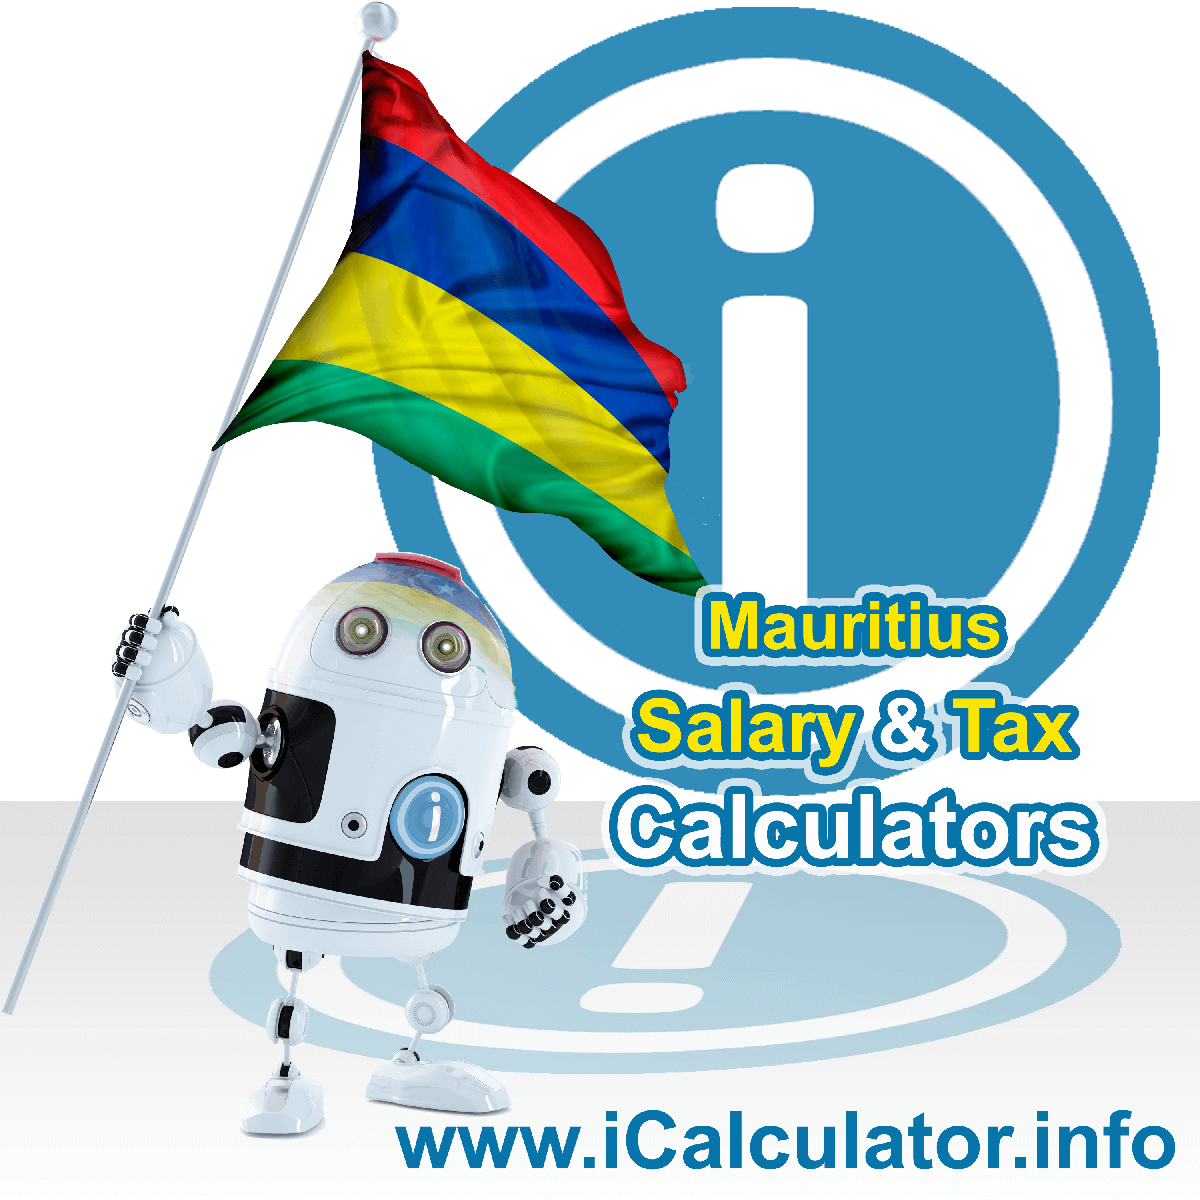 Mauritius Wage Calculator. This image shows the Mauritius flag and information relating to the tax formula for the Mauritius Tax Calculator